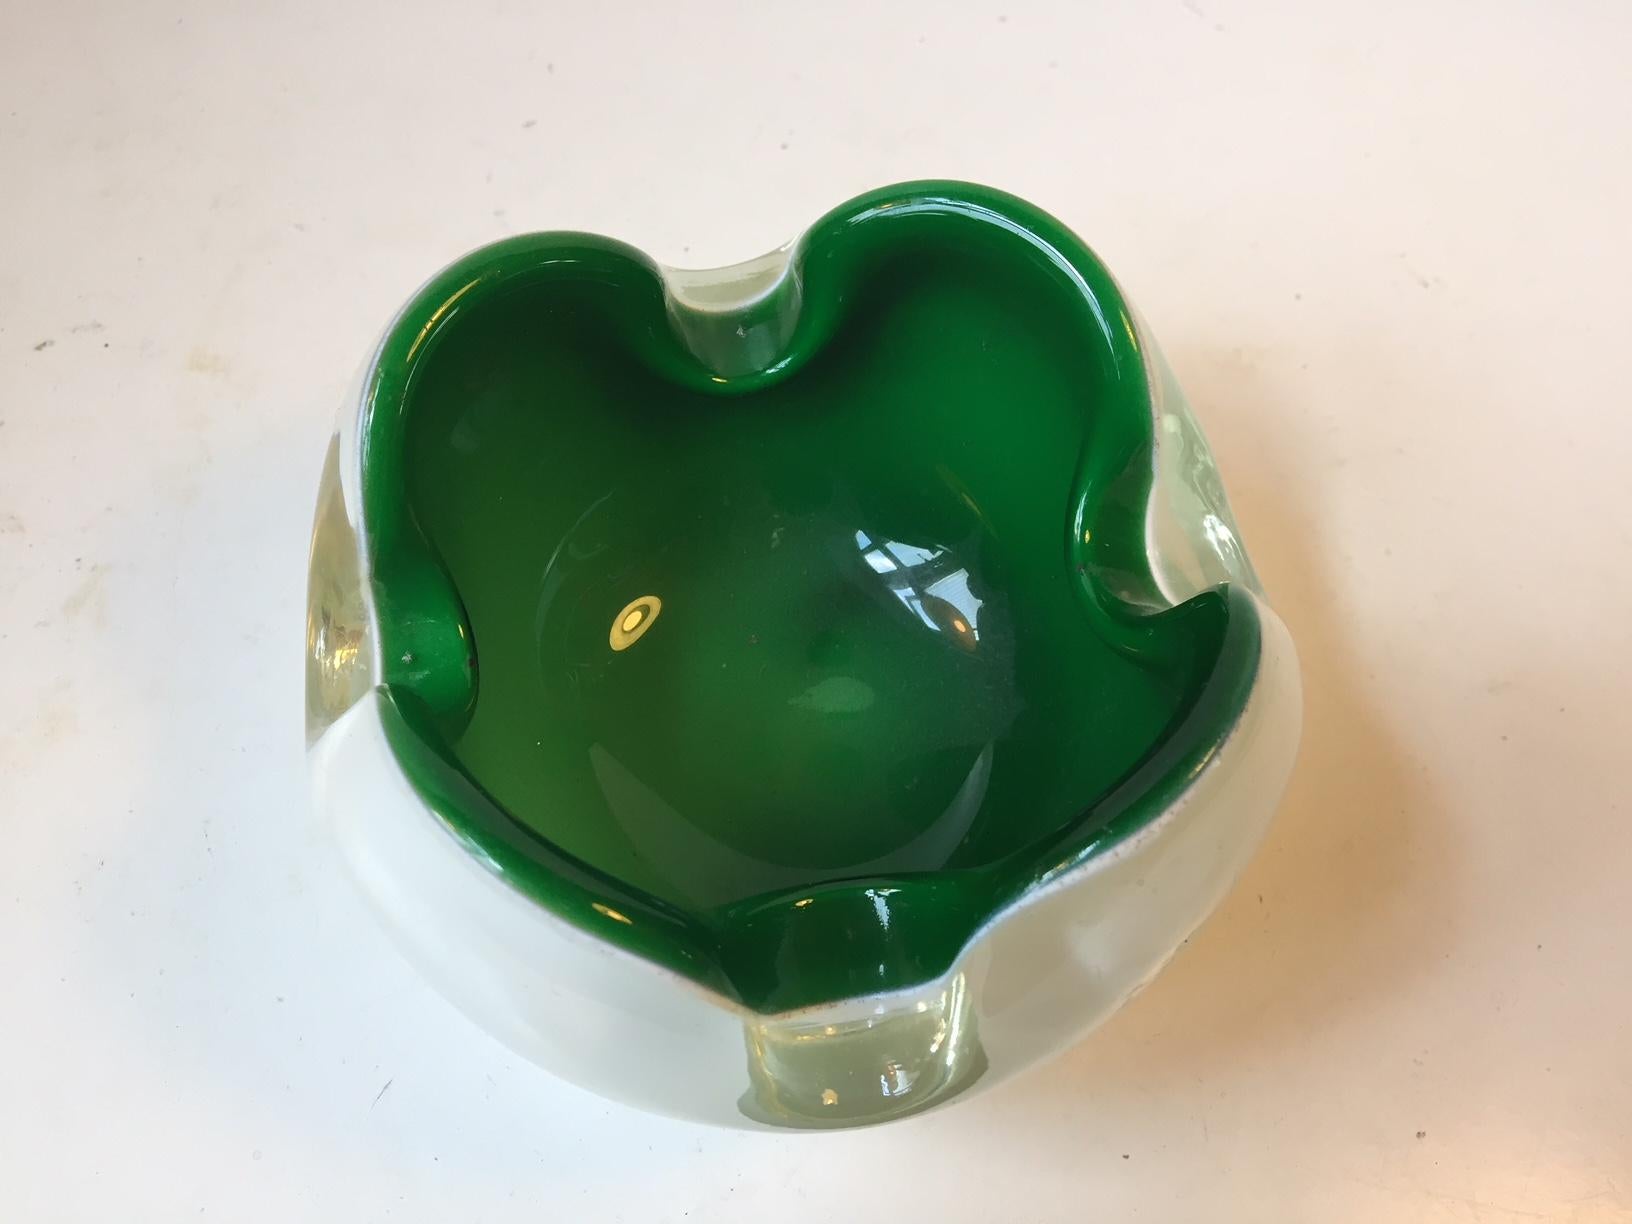 Collapsed decorative bowl or cigar ashtray composed of an exterior in opaline glass and a vibrant green interior. Made in Murano Italy during the late 1950s or early 60s.